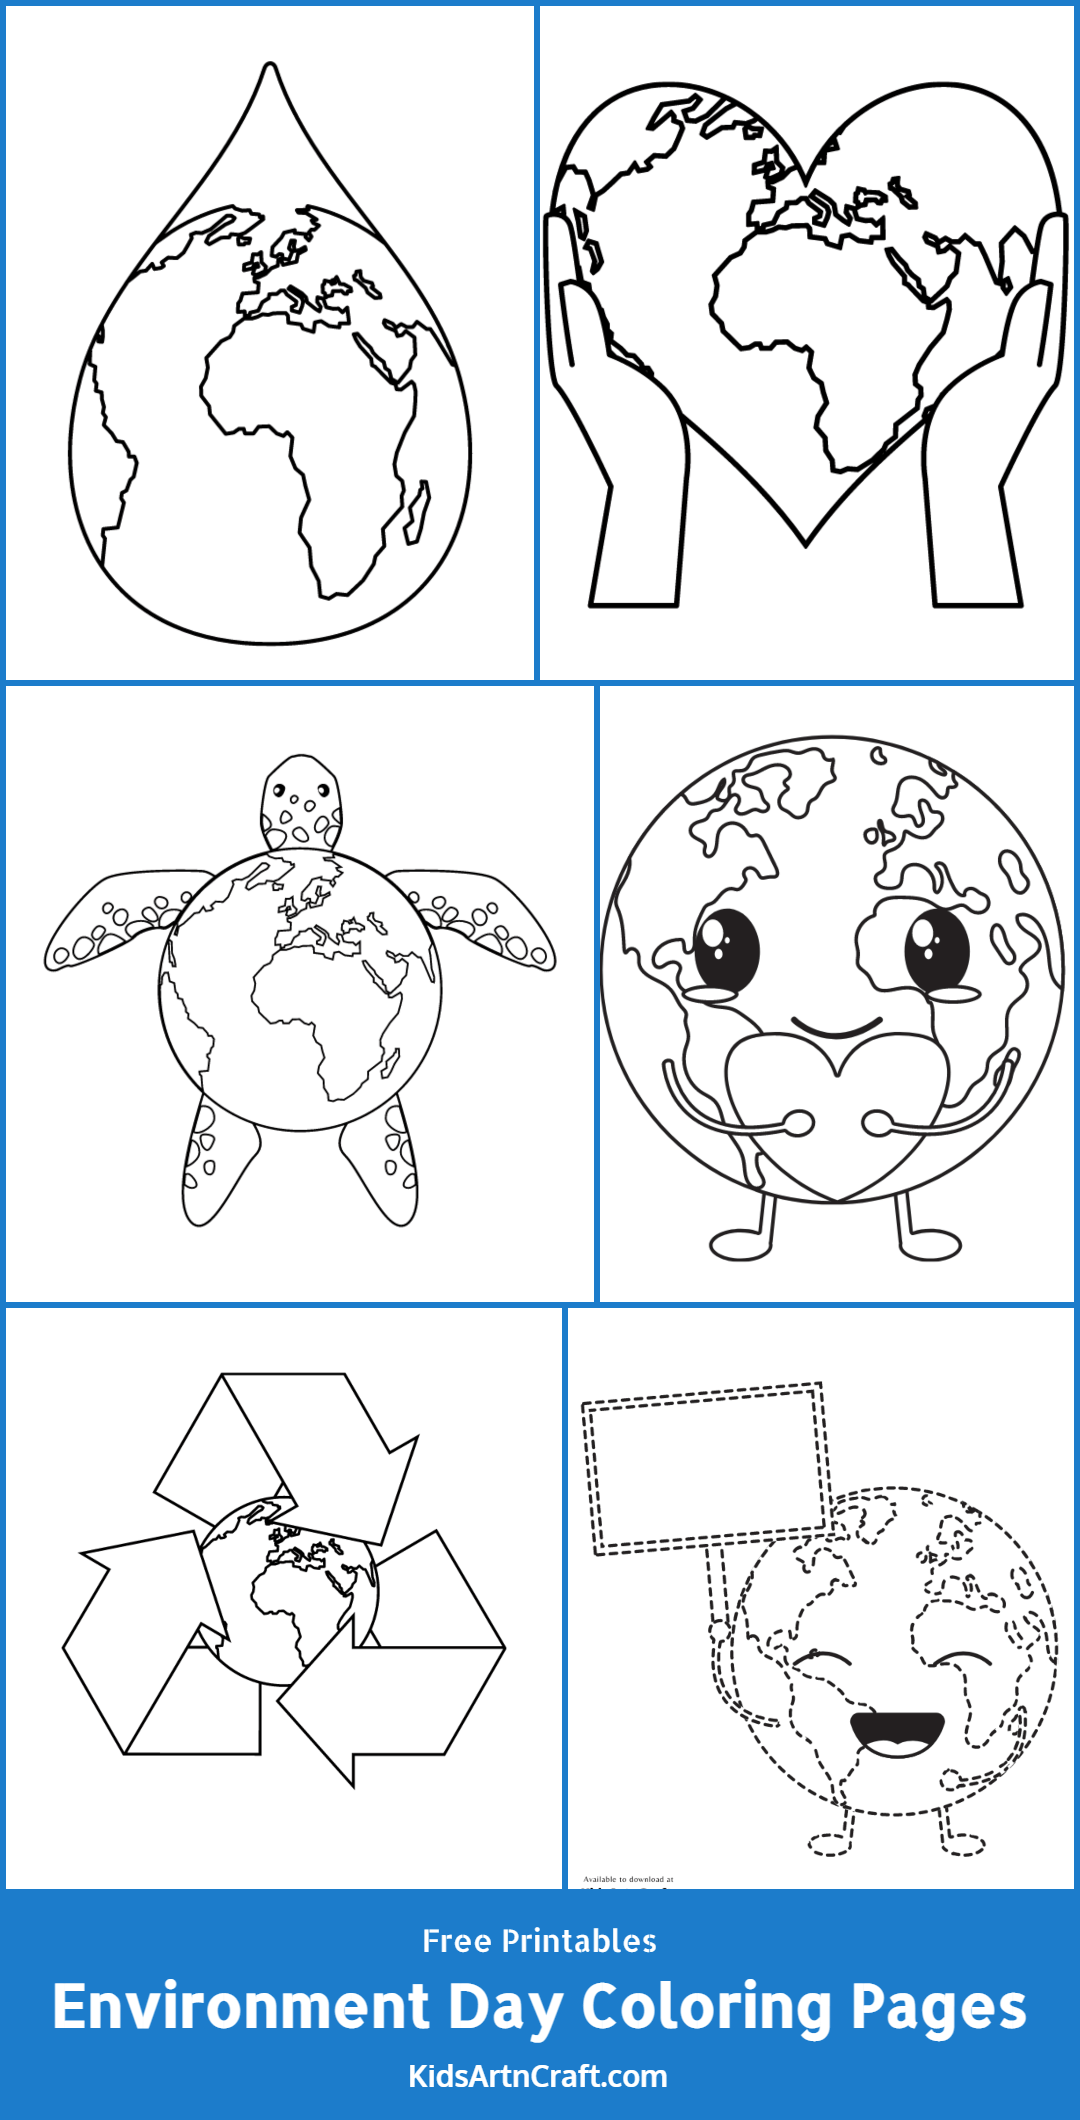  Environment Day Coloring Pages For Kids – Free Printables